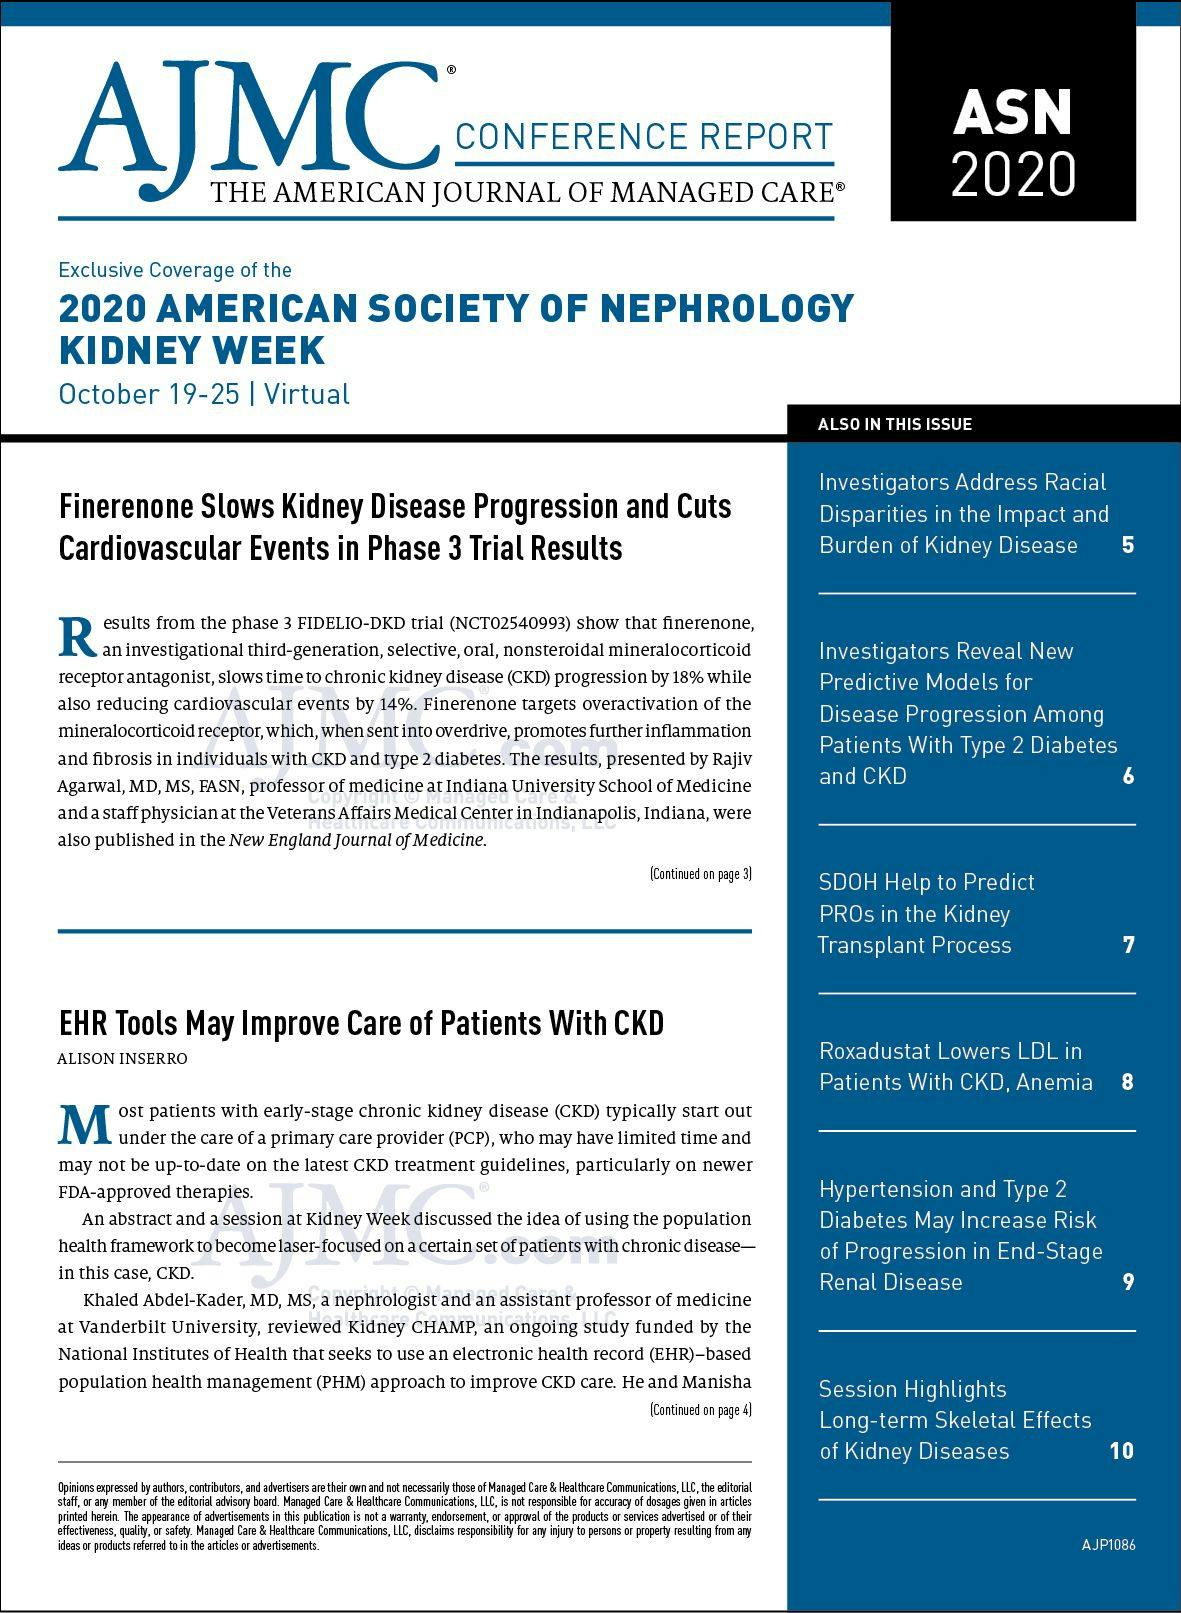 Exclusive Coverage of the 2020 American Society of Nephrology Kidney Week